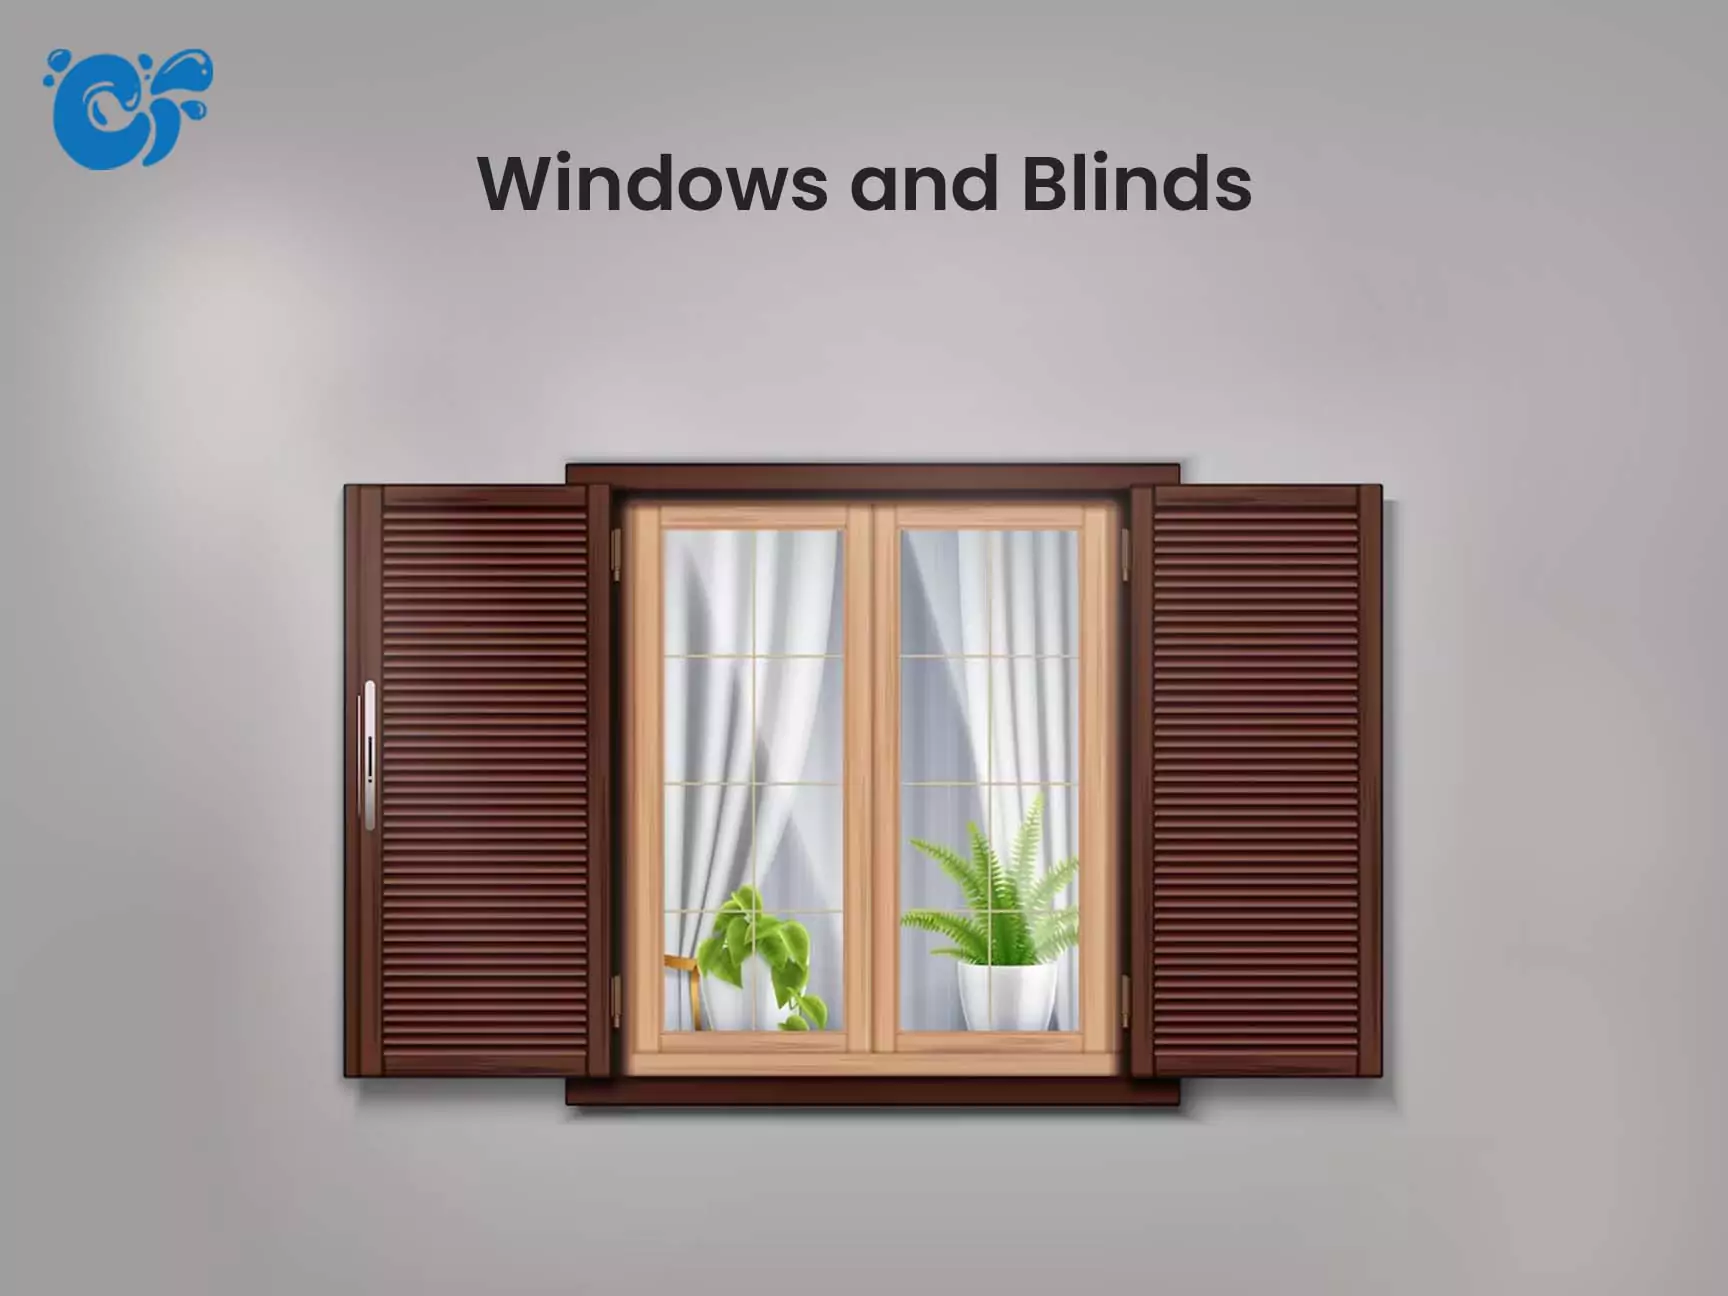 Windows and Blinds